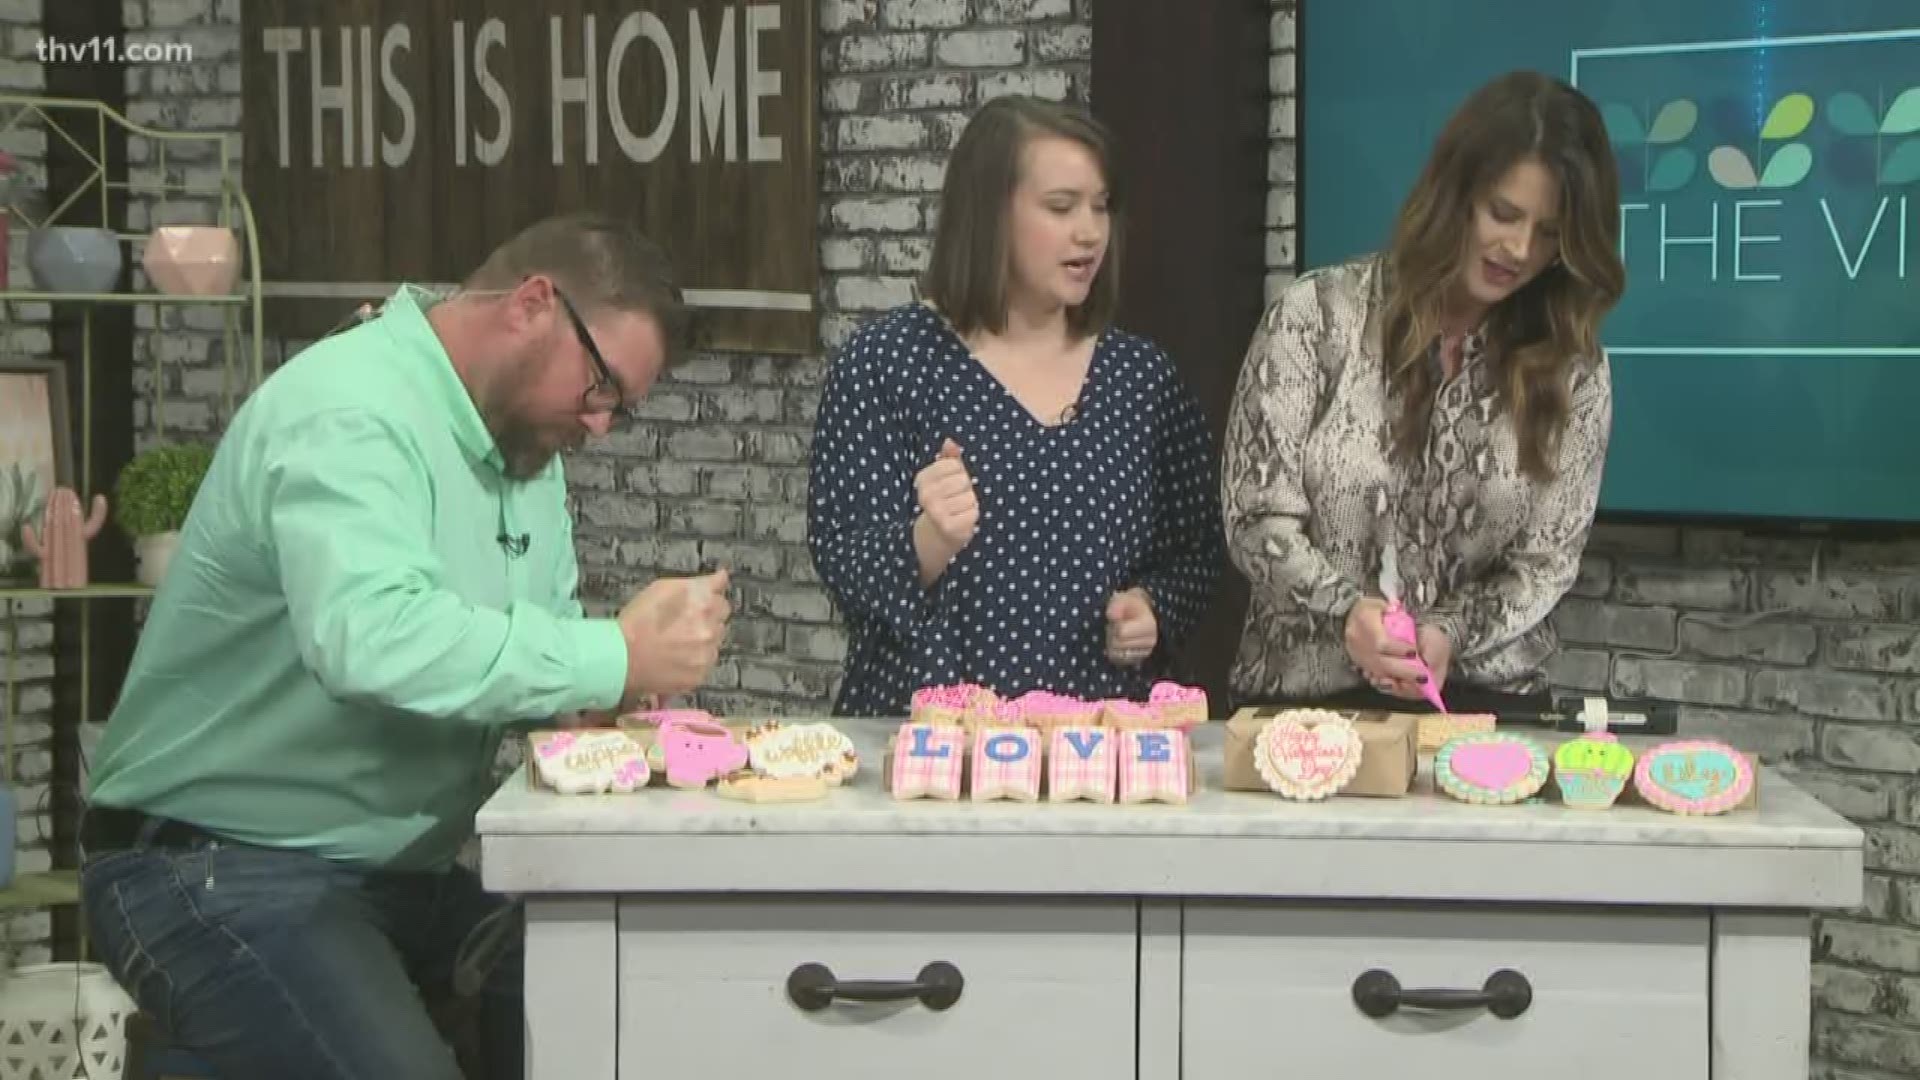 Three Best Bakery showed The Vine team how to make and decorate easy treats for Valentine Day.